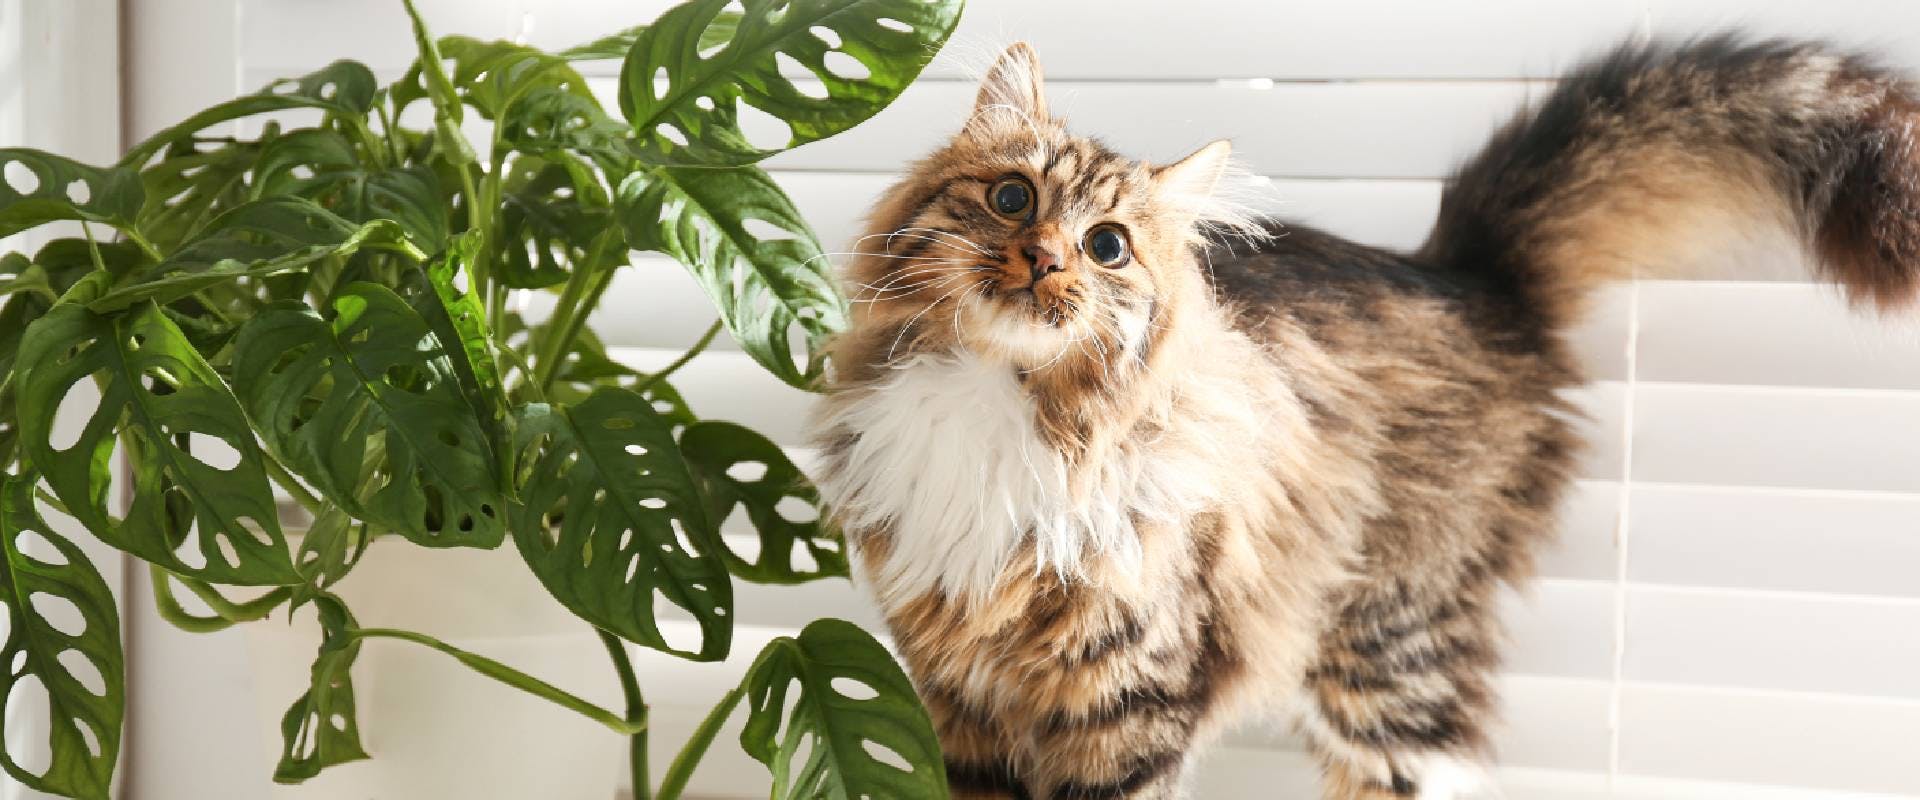 Fluffy cat next to a house plant